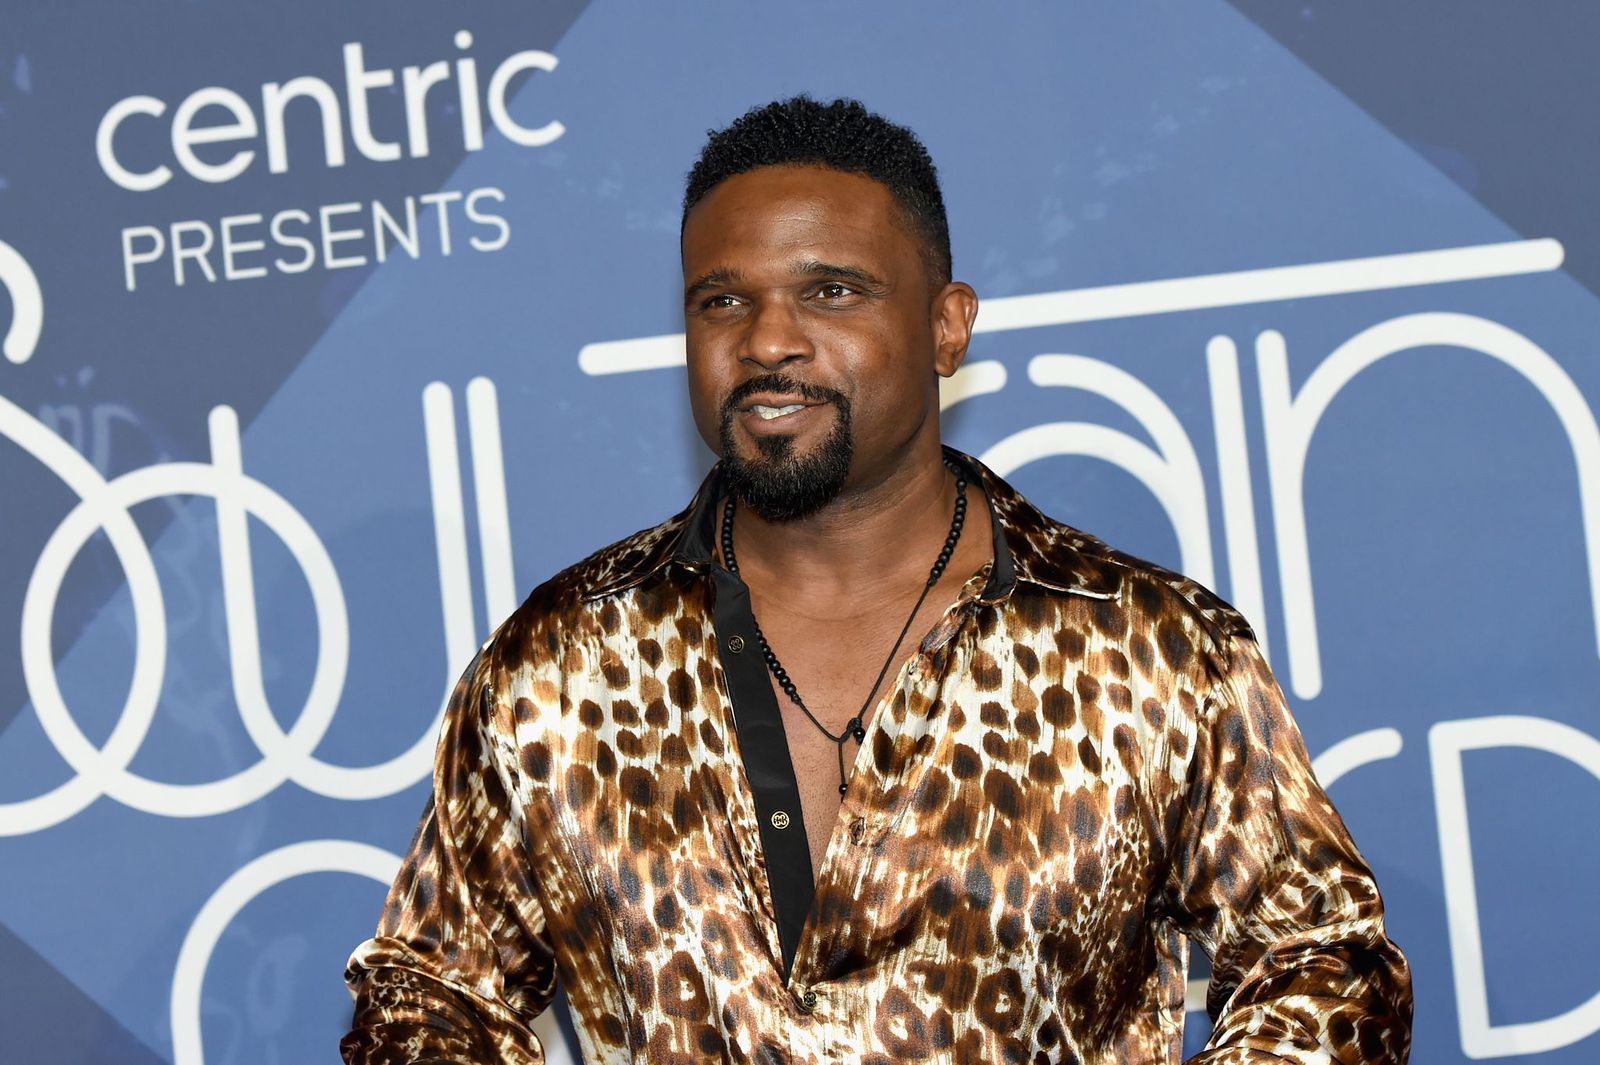 Darius McCrary attends the 2016 Soul Train Music Awards at the Orleans Arena on November 6, 2016 in Las Vegas, Nevada. | Photo: Getty Images